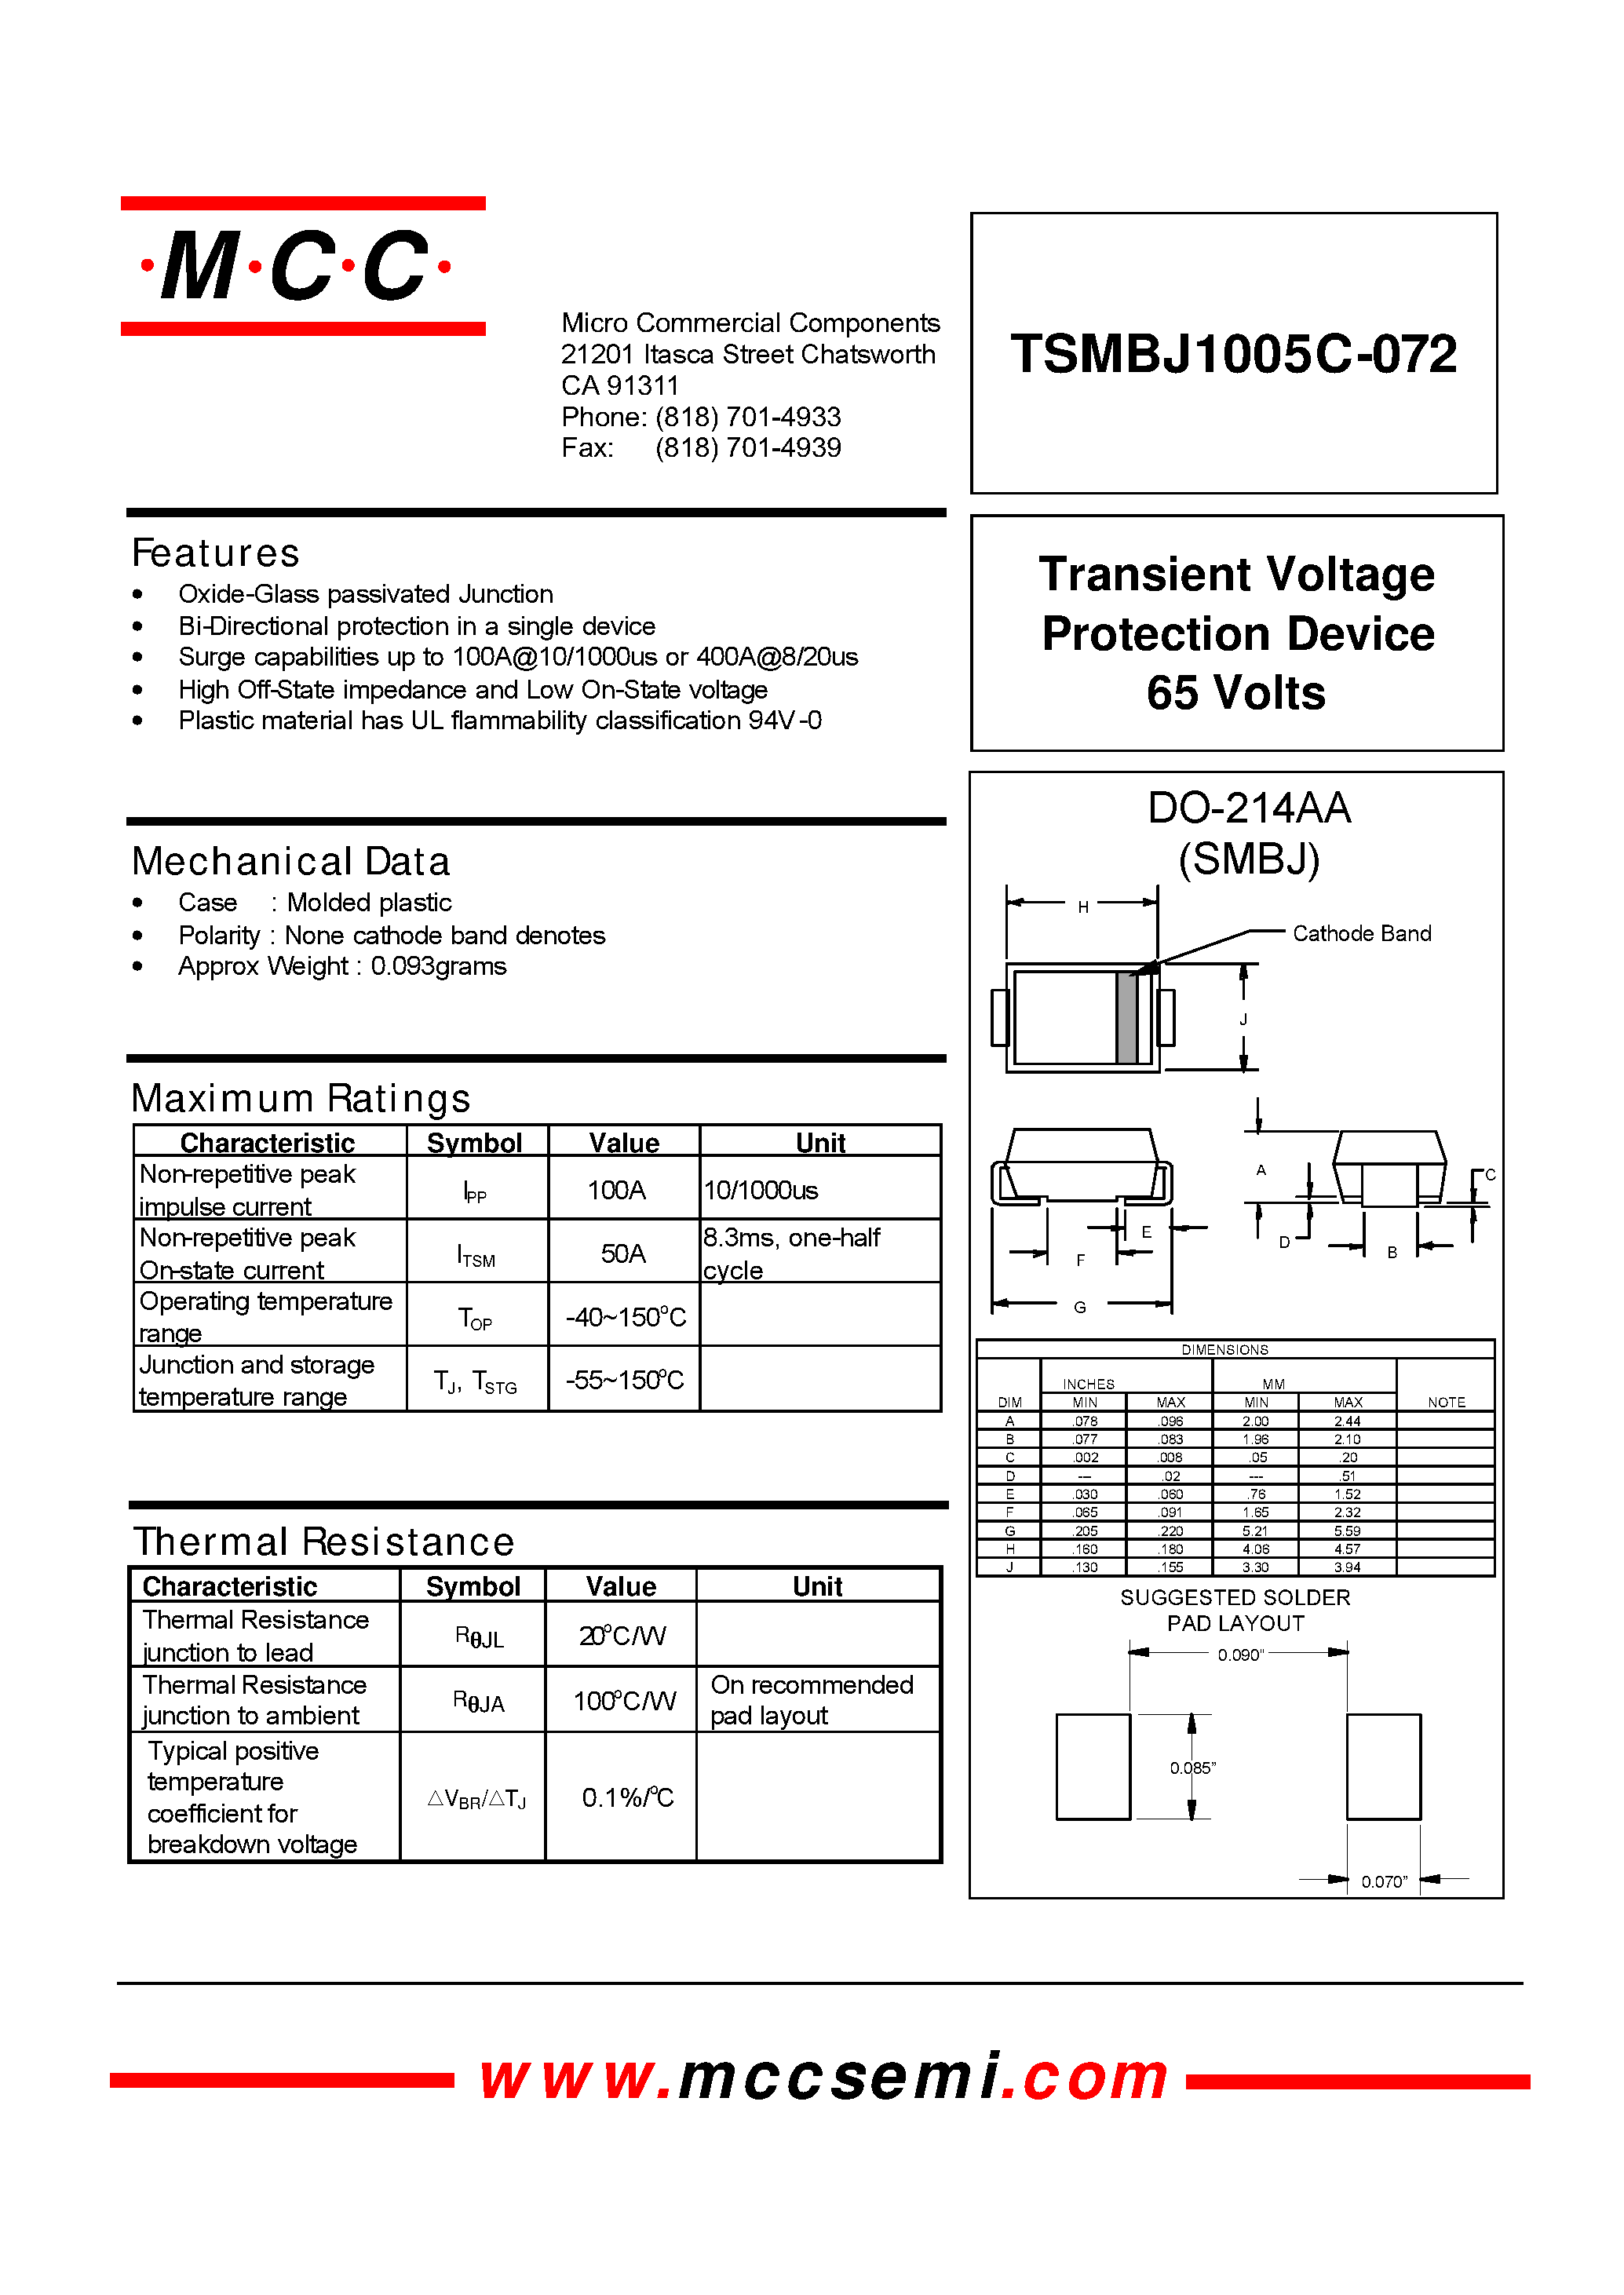 Datasheet TSMBJ1005C-072 - Transient Voltage Protection Device 65 Volts page 1